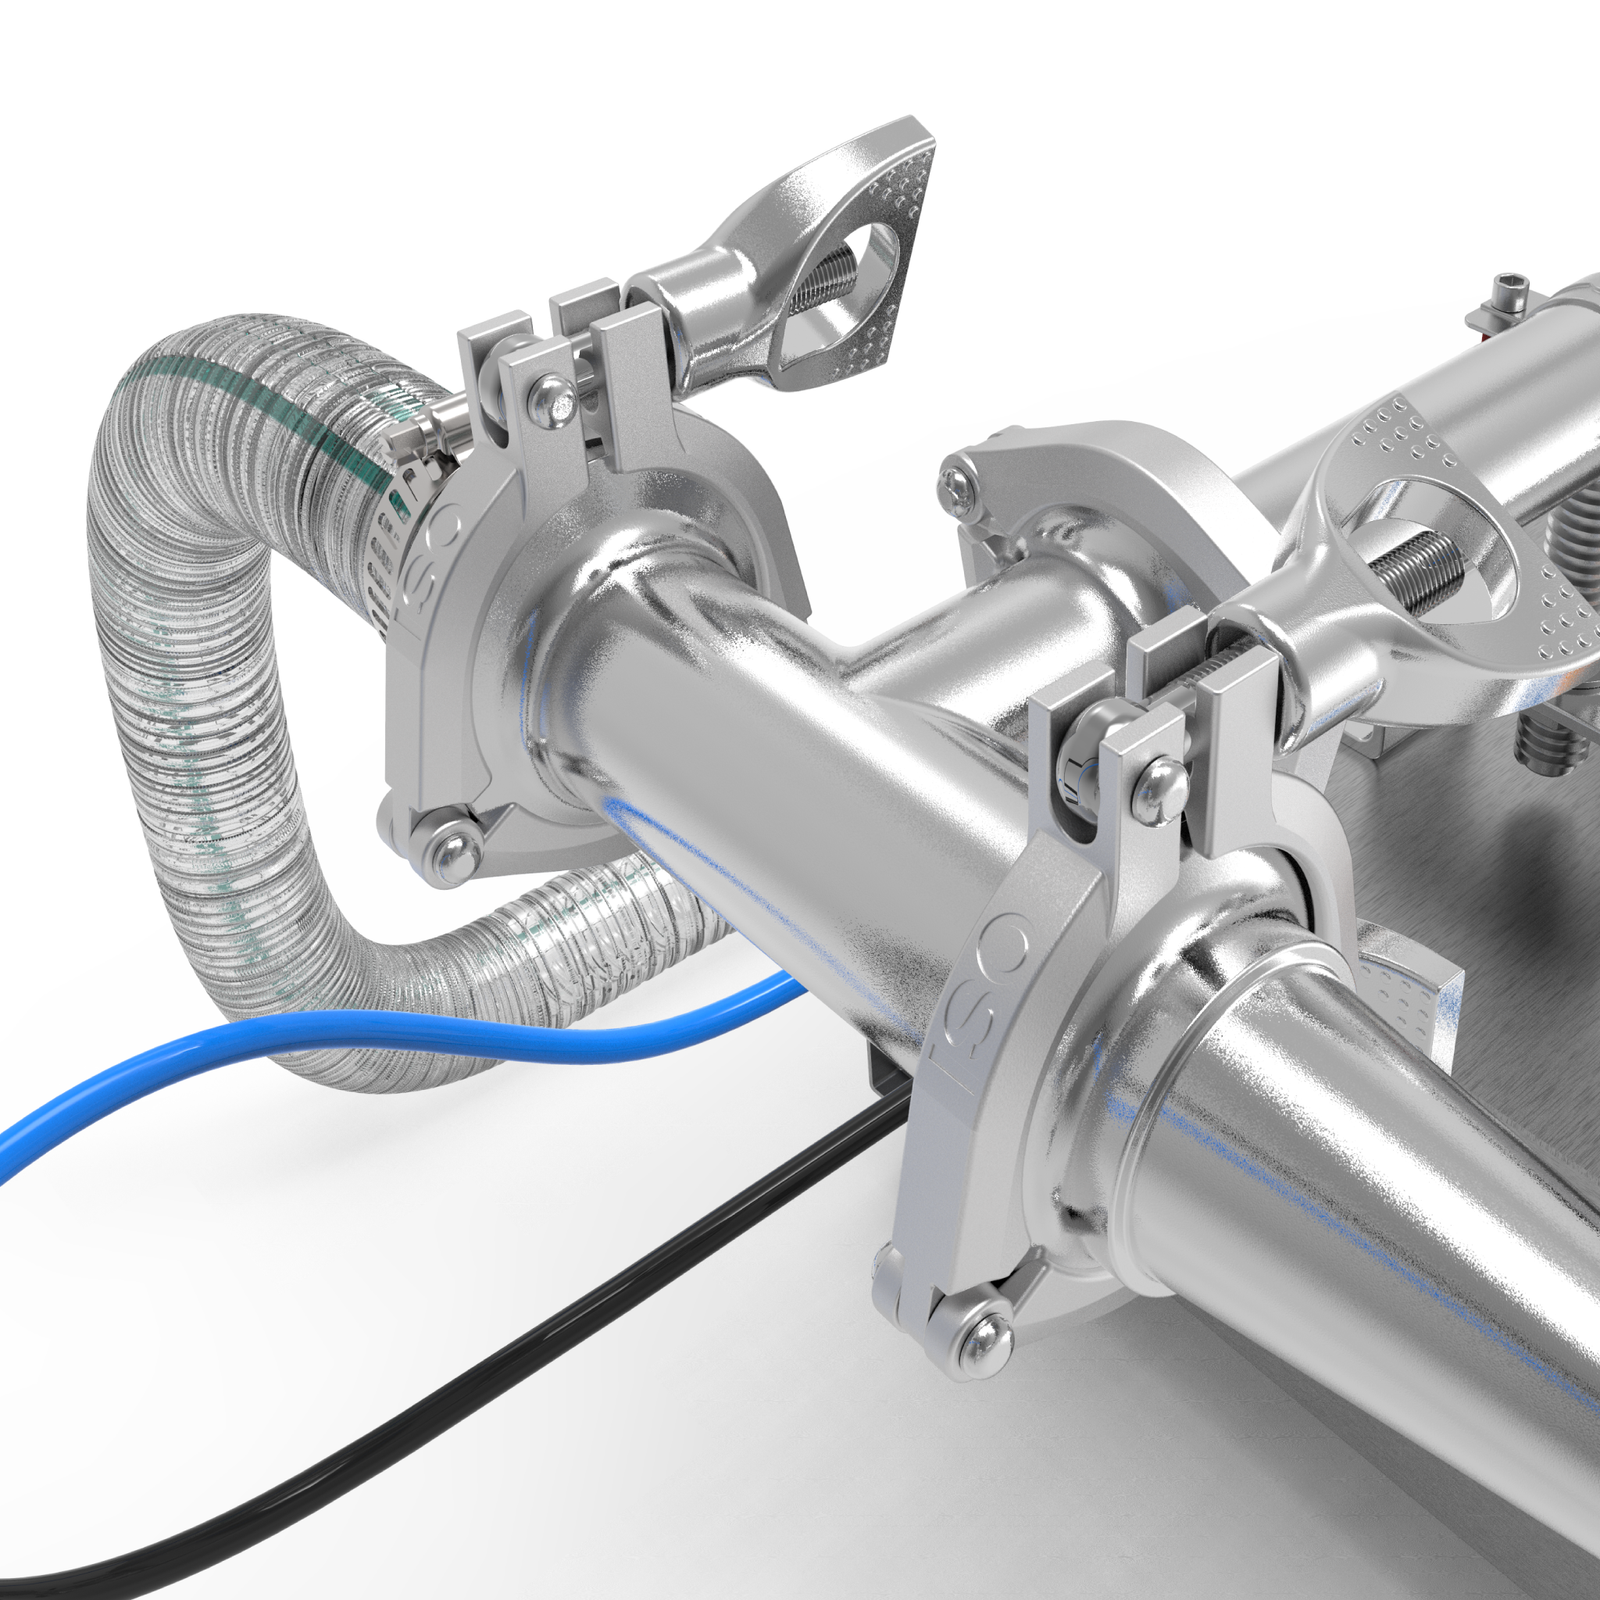 Closeup of the triclamps and main input hose of the JORES TECHNOLOGIES® Piston filler